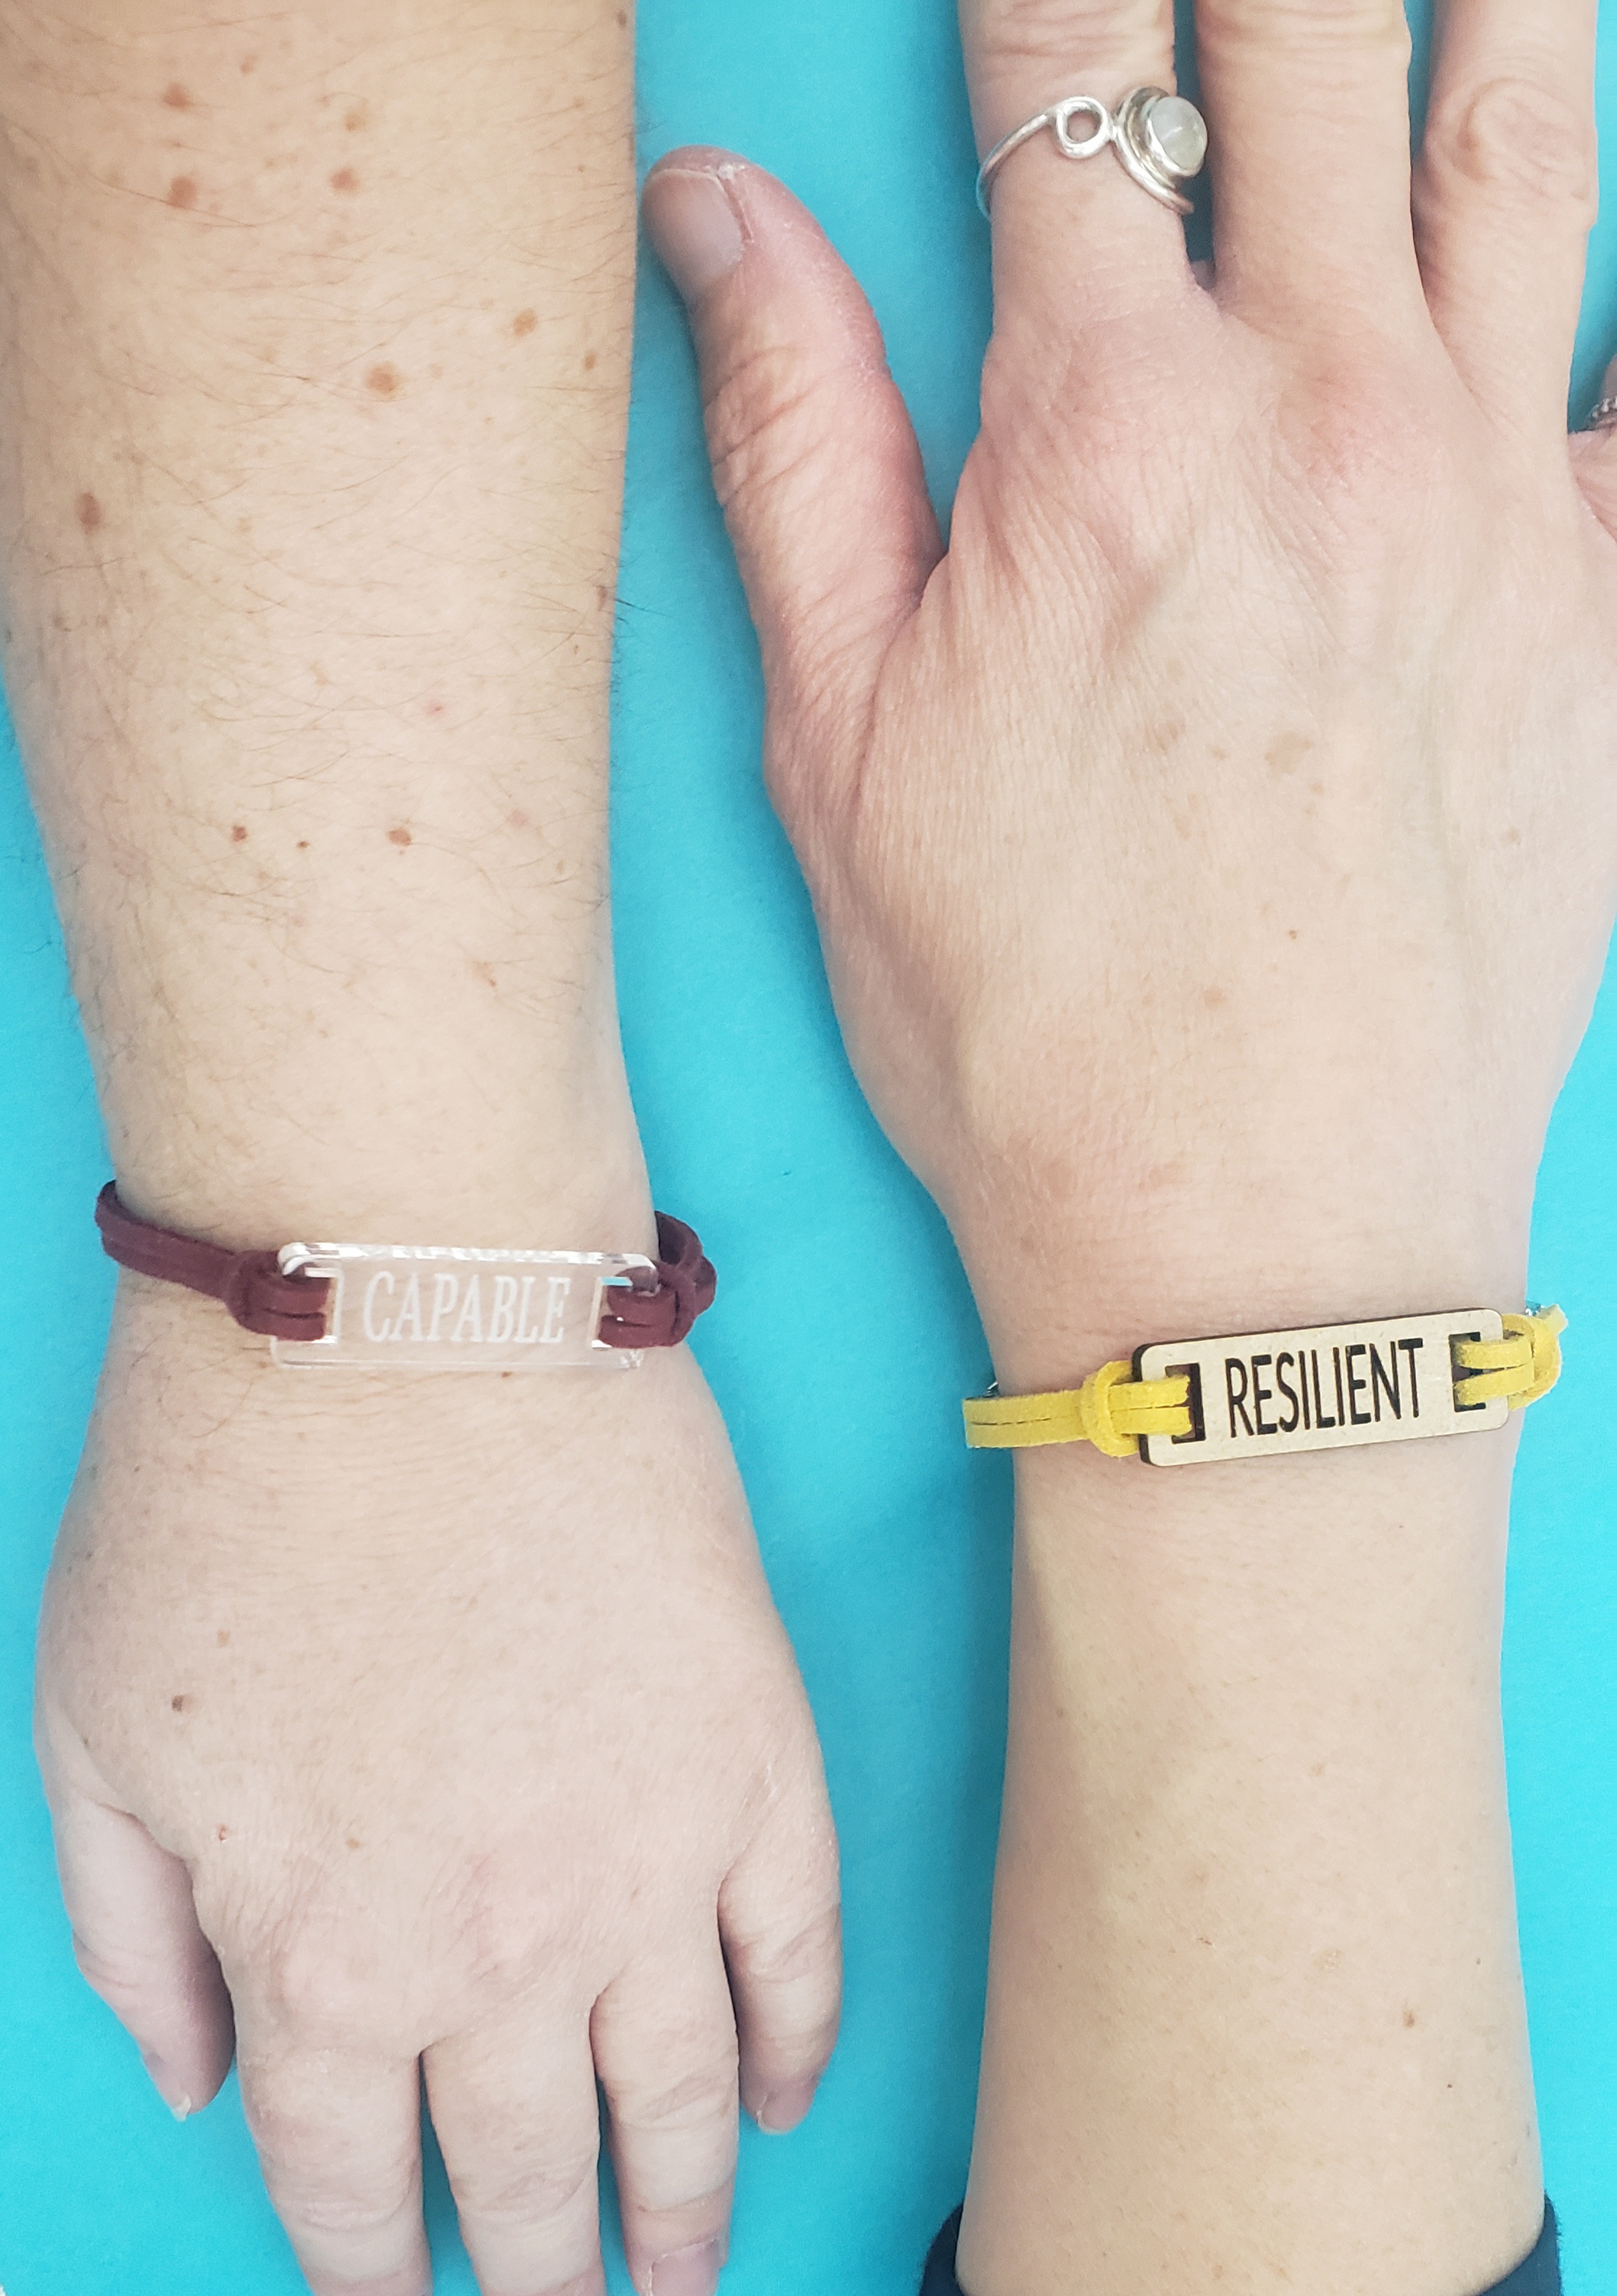 Bracelets that read "Capable" and "Resilient"